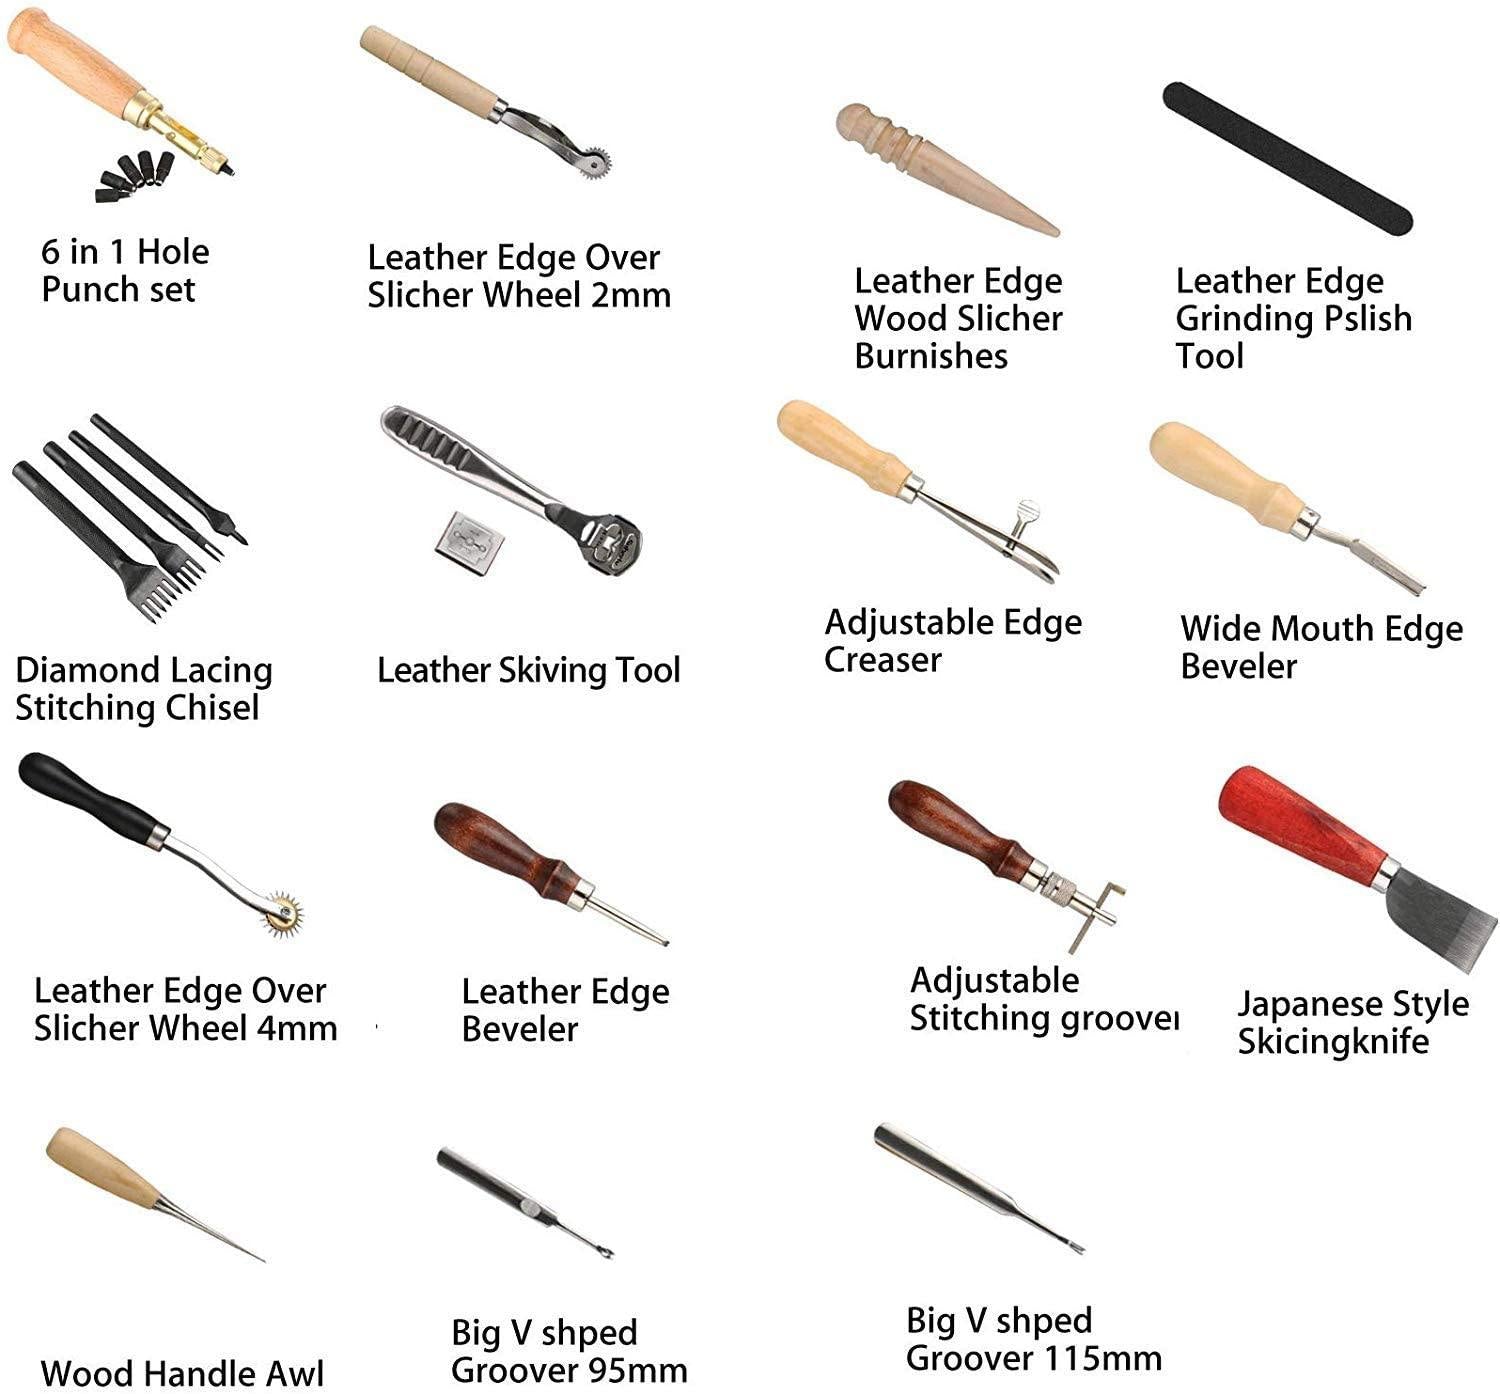 Leather Carving Tools - Experienced Insights for Selection